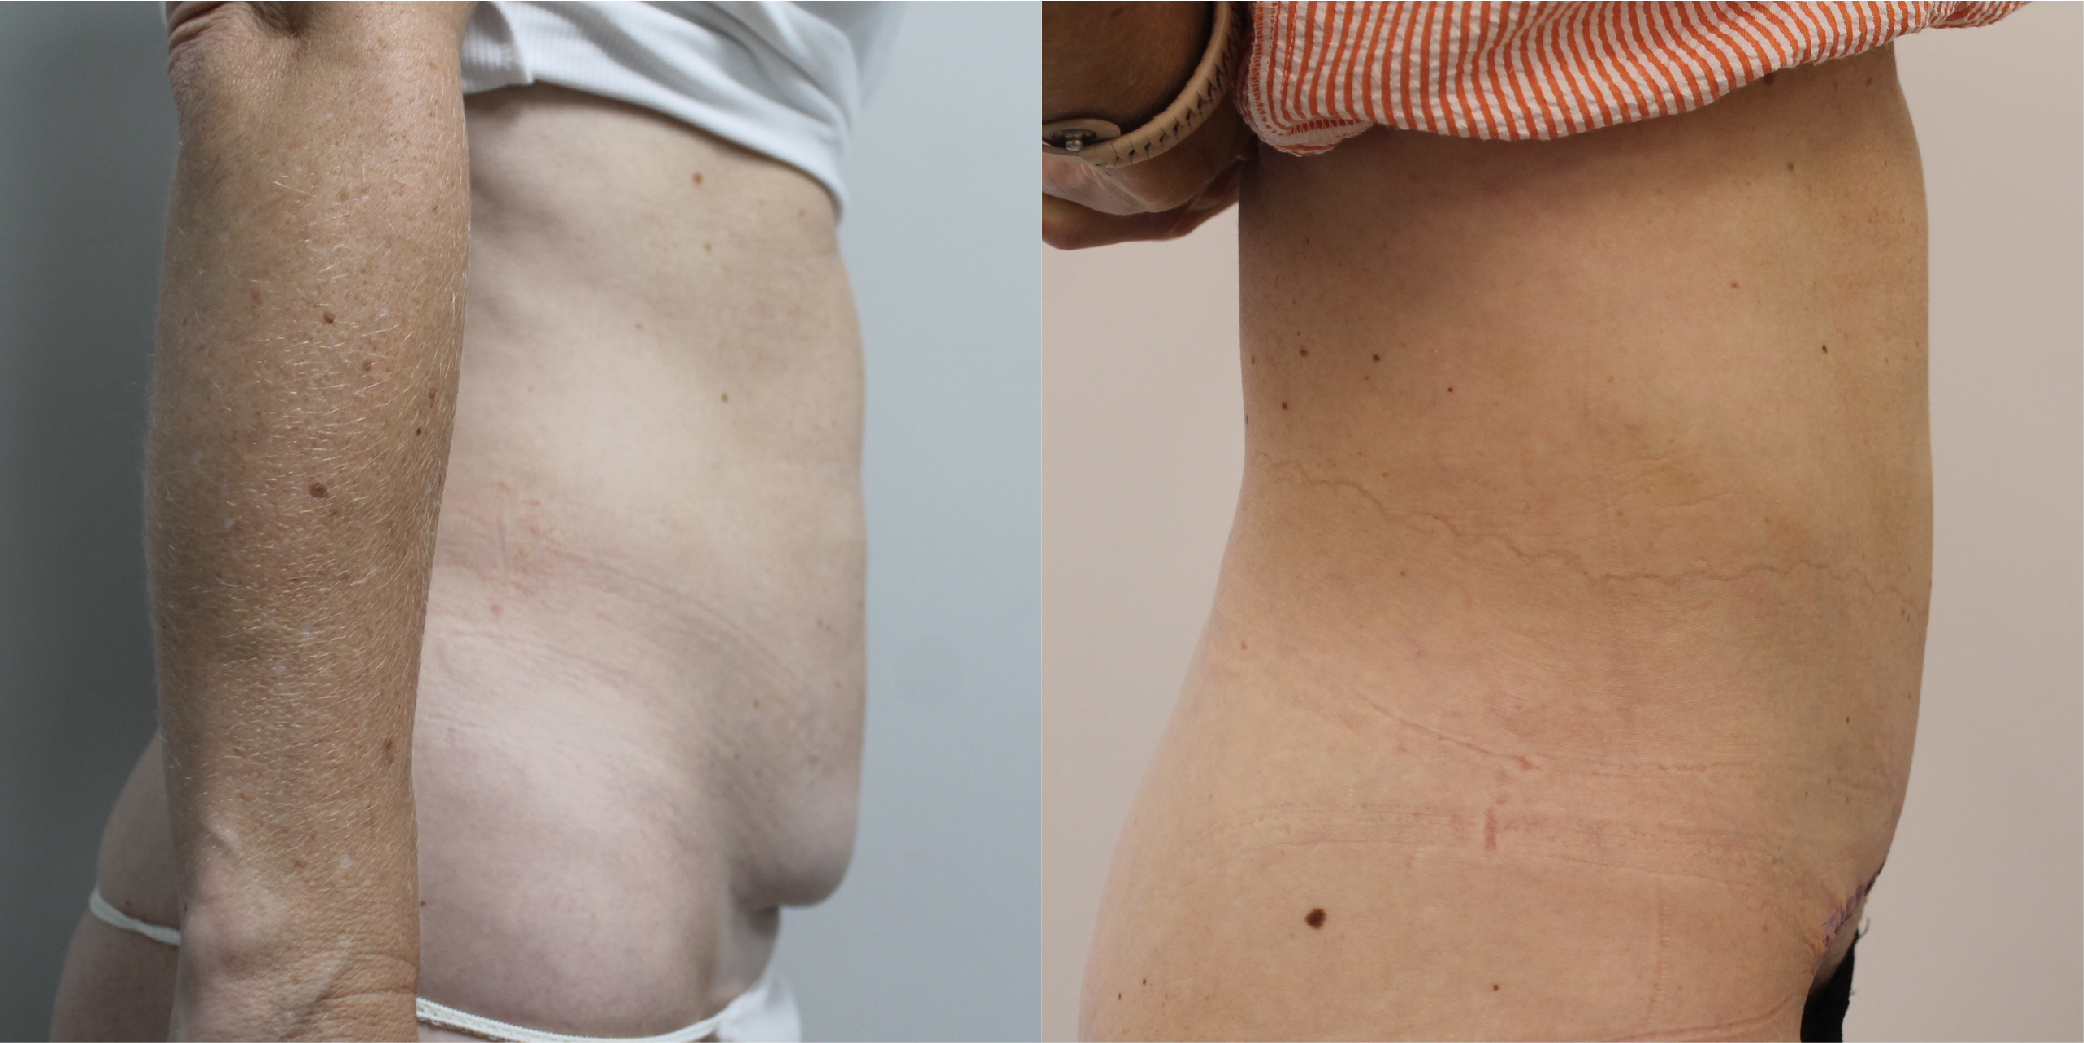 BodyTite Before & After Image